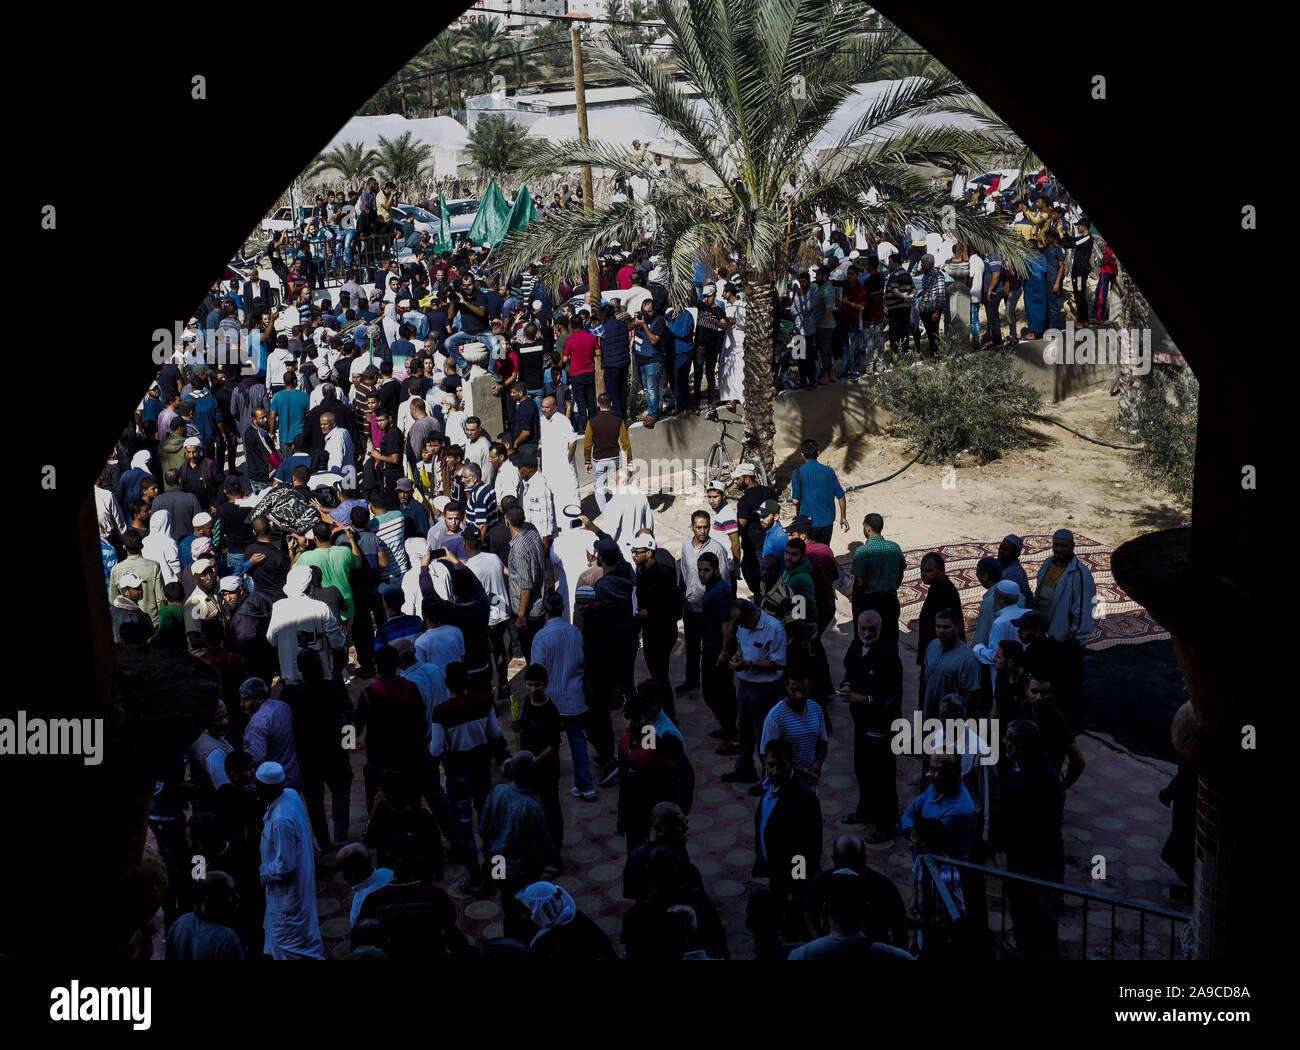 Crowd of Palestinian mourners during a funeral of Rasmi Abu Malhous and seven members of his family at a mosque in Deir al-Balah, central Gaza Strip. The deceased were killed in an overnight Israeli missile strike that targeted their house. Stock Photo